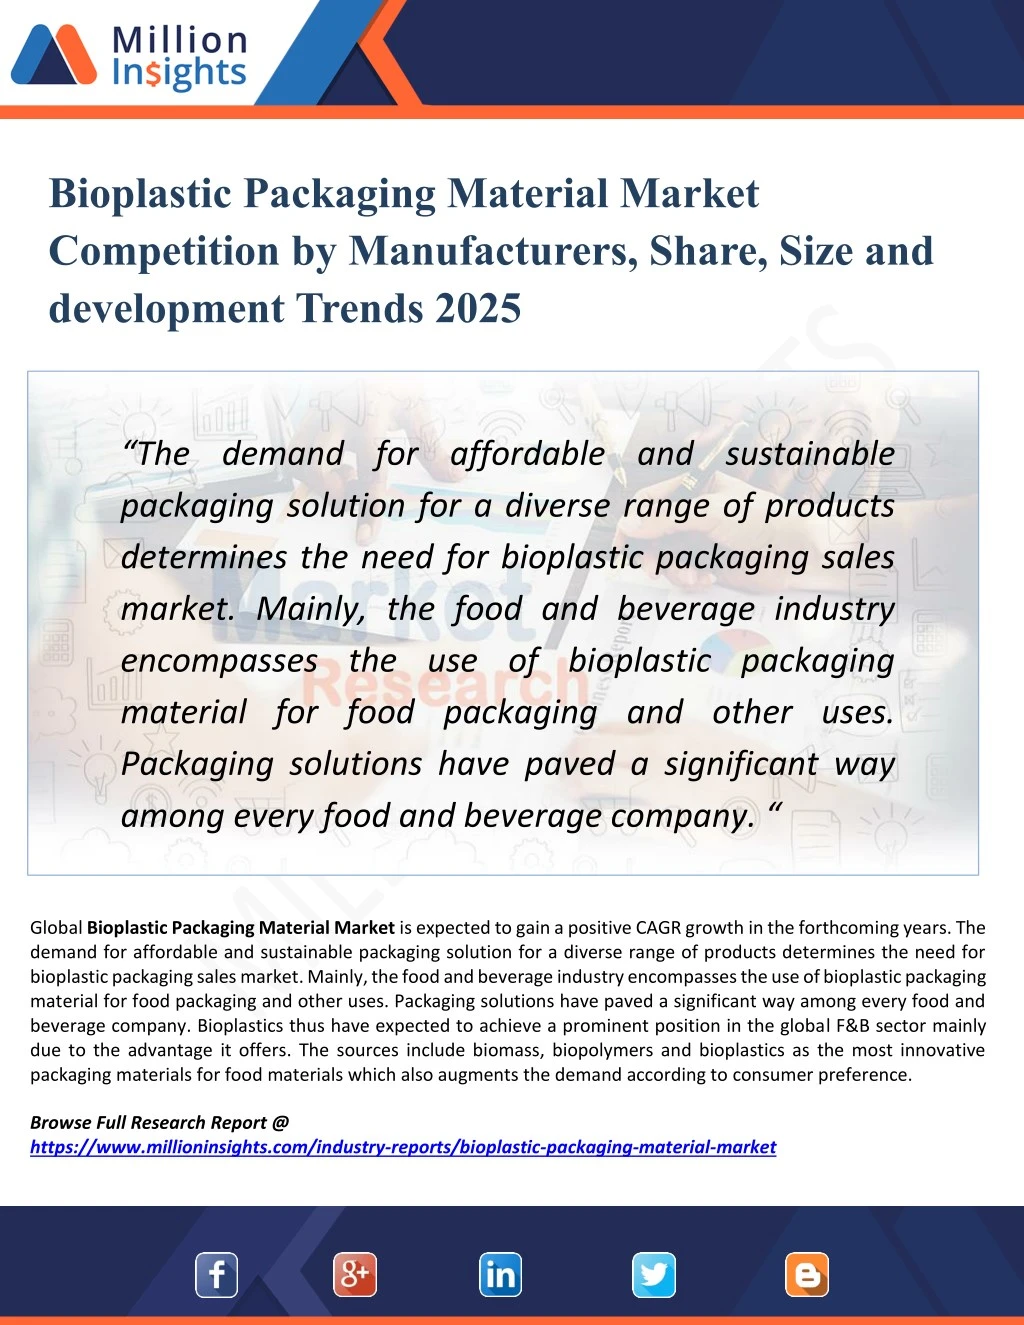 bioplastic packaging material market competition